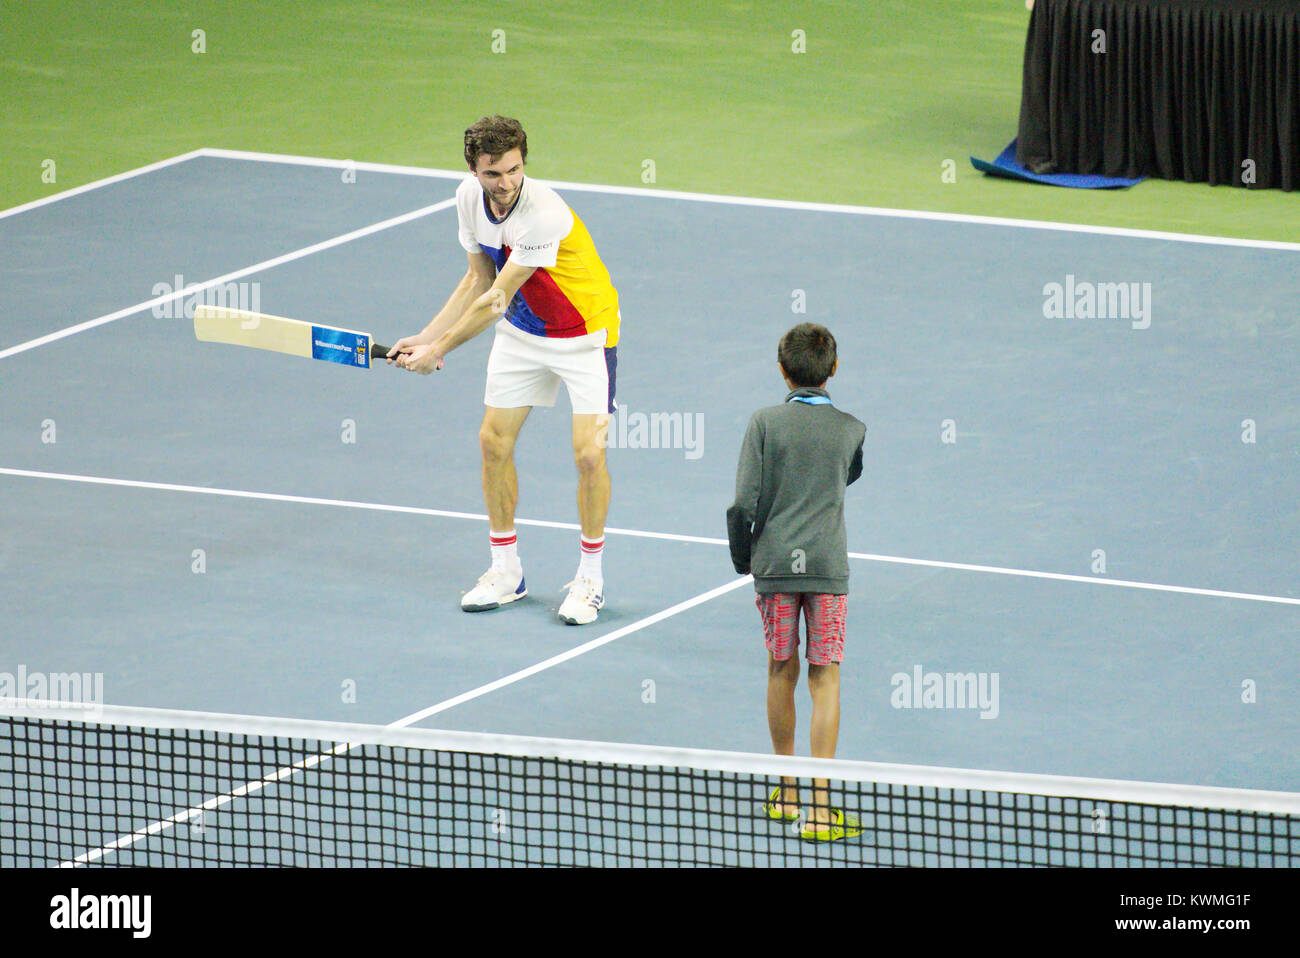 Pune, India. 3rd Jan, 2018. Gilles Simon of France gestures after his upset win in the second round of Singles competition at Tata Open Maharashtra at the Mahalunge Balewadi Tennis Stadium in Pune, India. Credit: Karunesh Johri/Alamy Live News Stock Photo